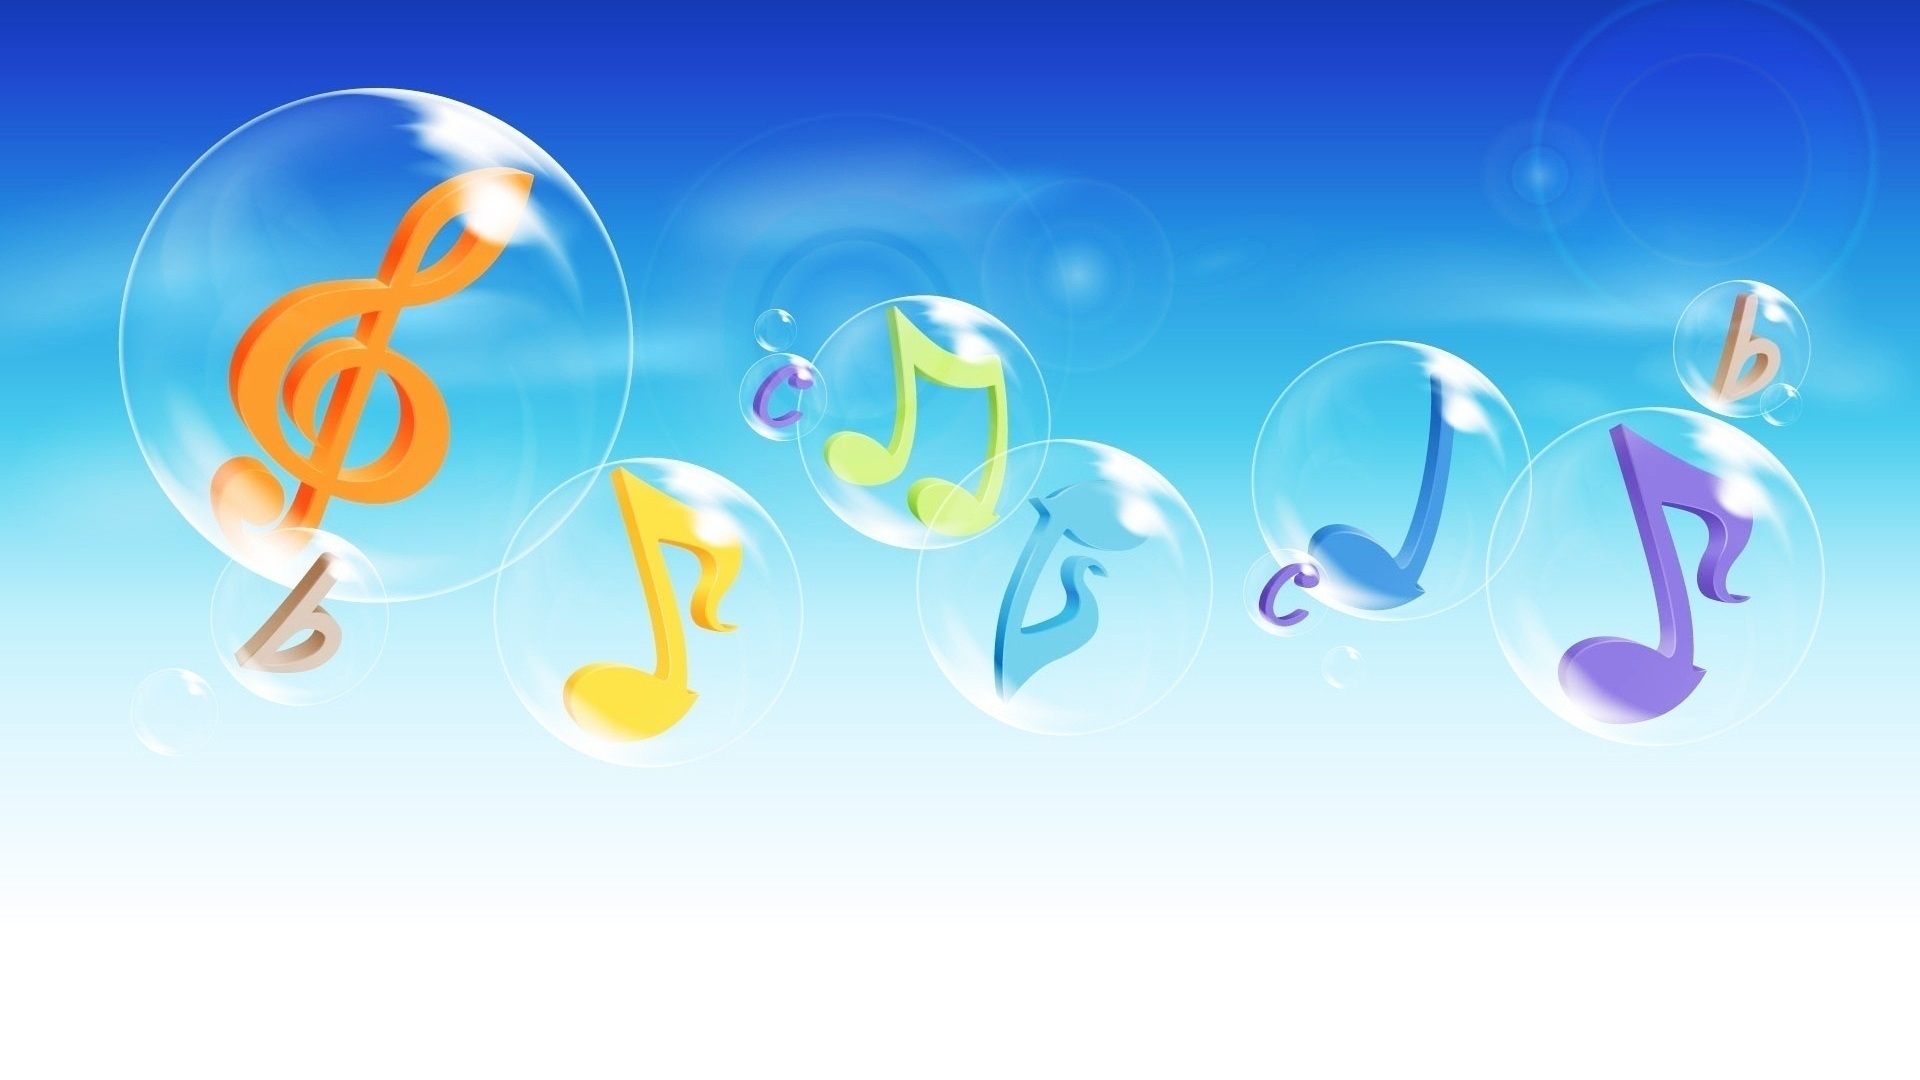 Music Notes in The Air for 1920 x 1080 HDTV 1080p resolution